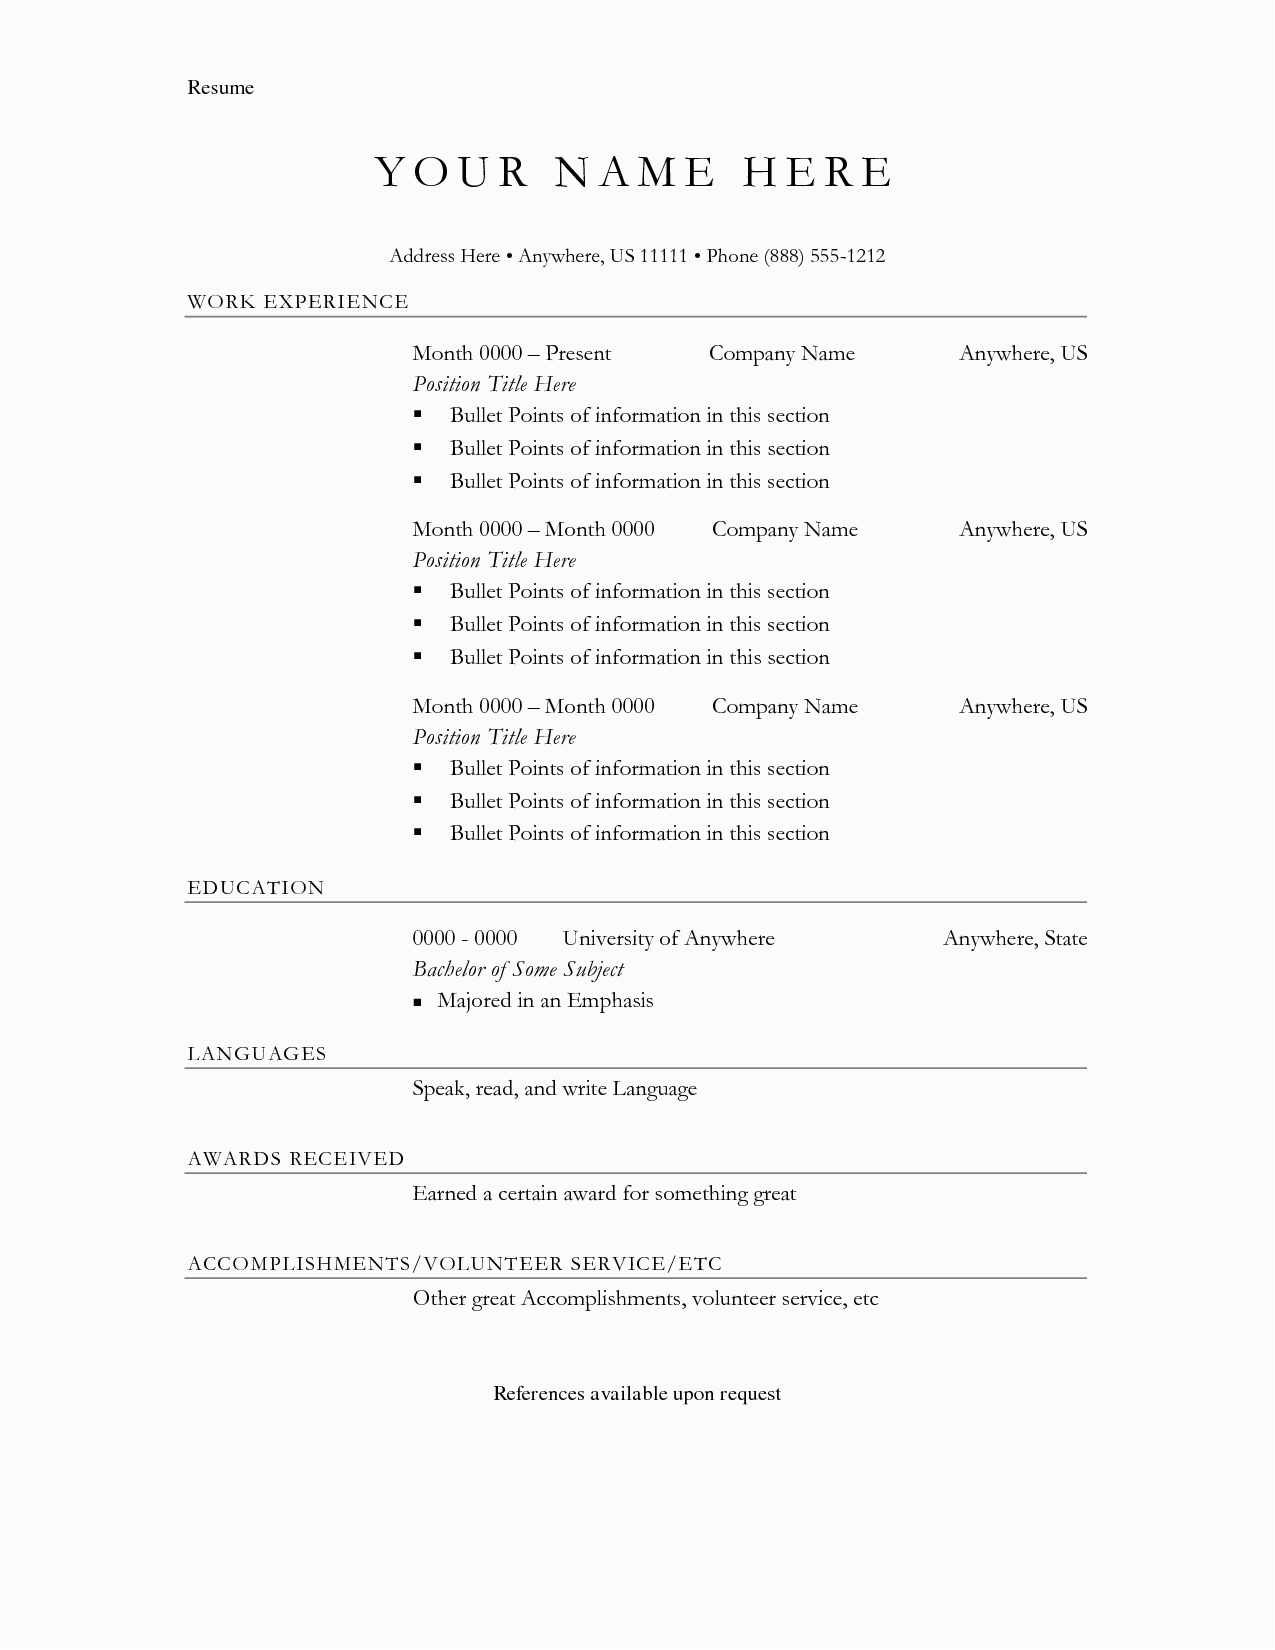 Query Language Bullet Point for Resume Sample Bullet Point Resume Template Free Resume Sample Education